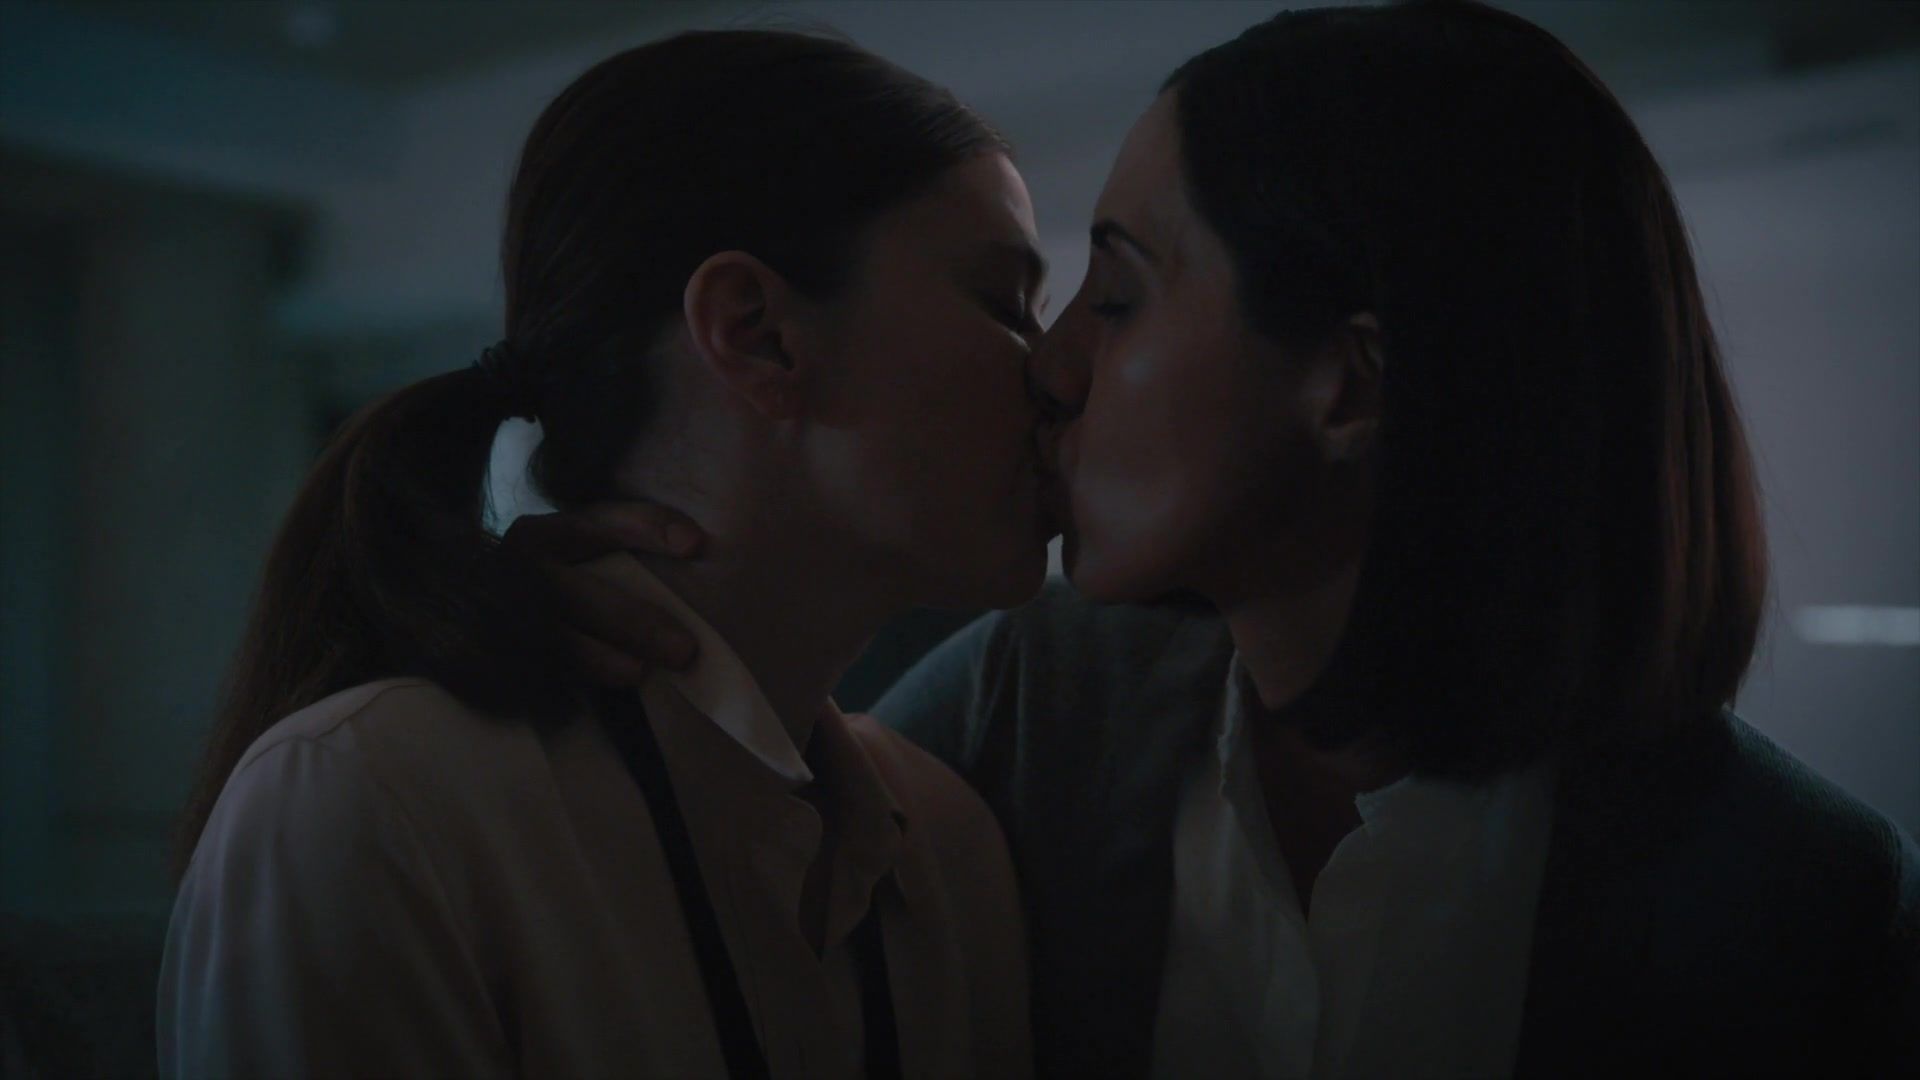 GoodVibes The Girlfriend Experience2 - Lesbian in TV movie Bubble